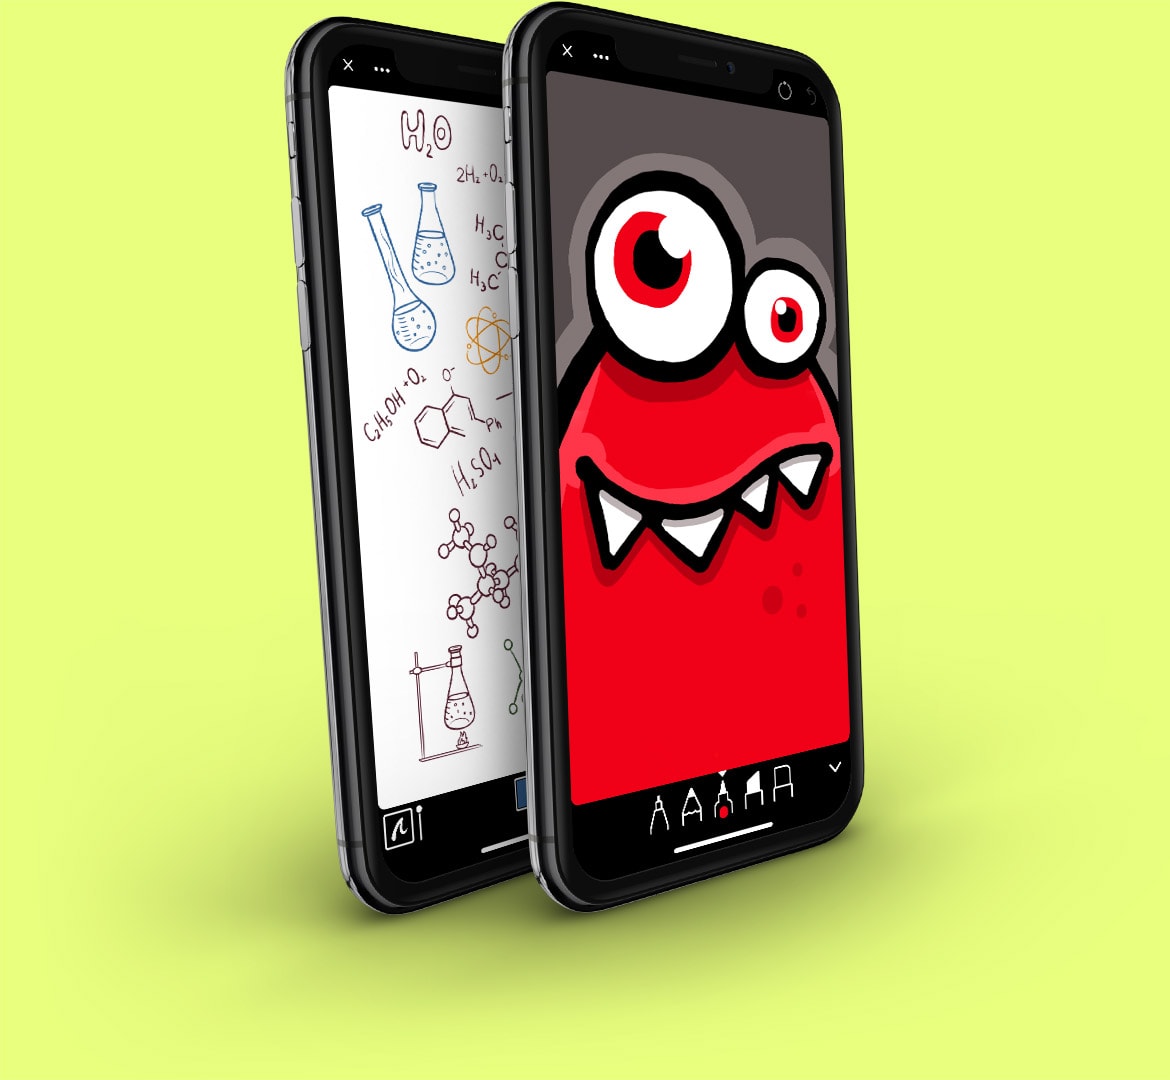 The Linea Go iPhone drawing app puts power at your fingertip. So cute!